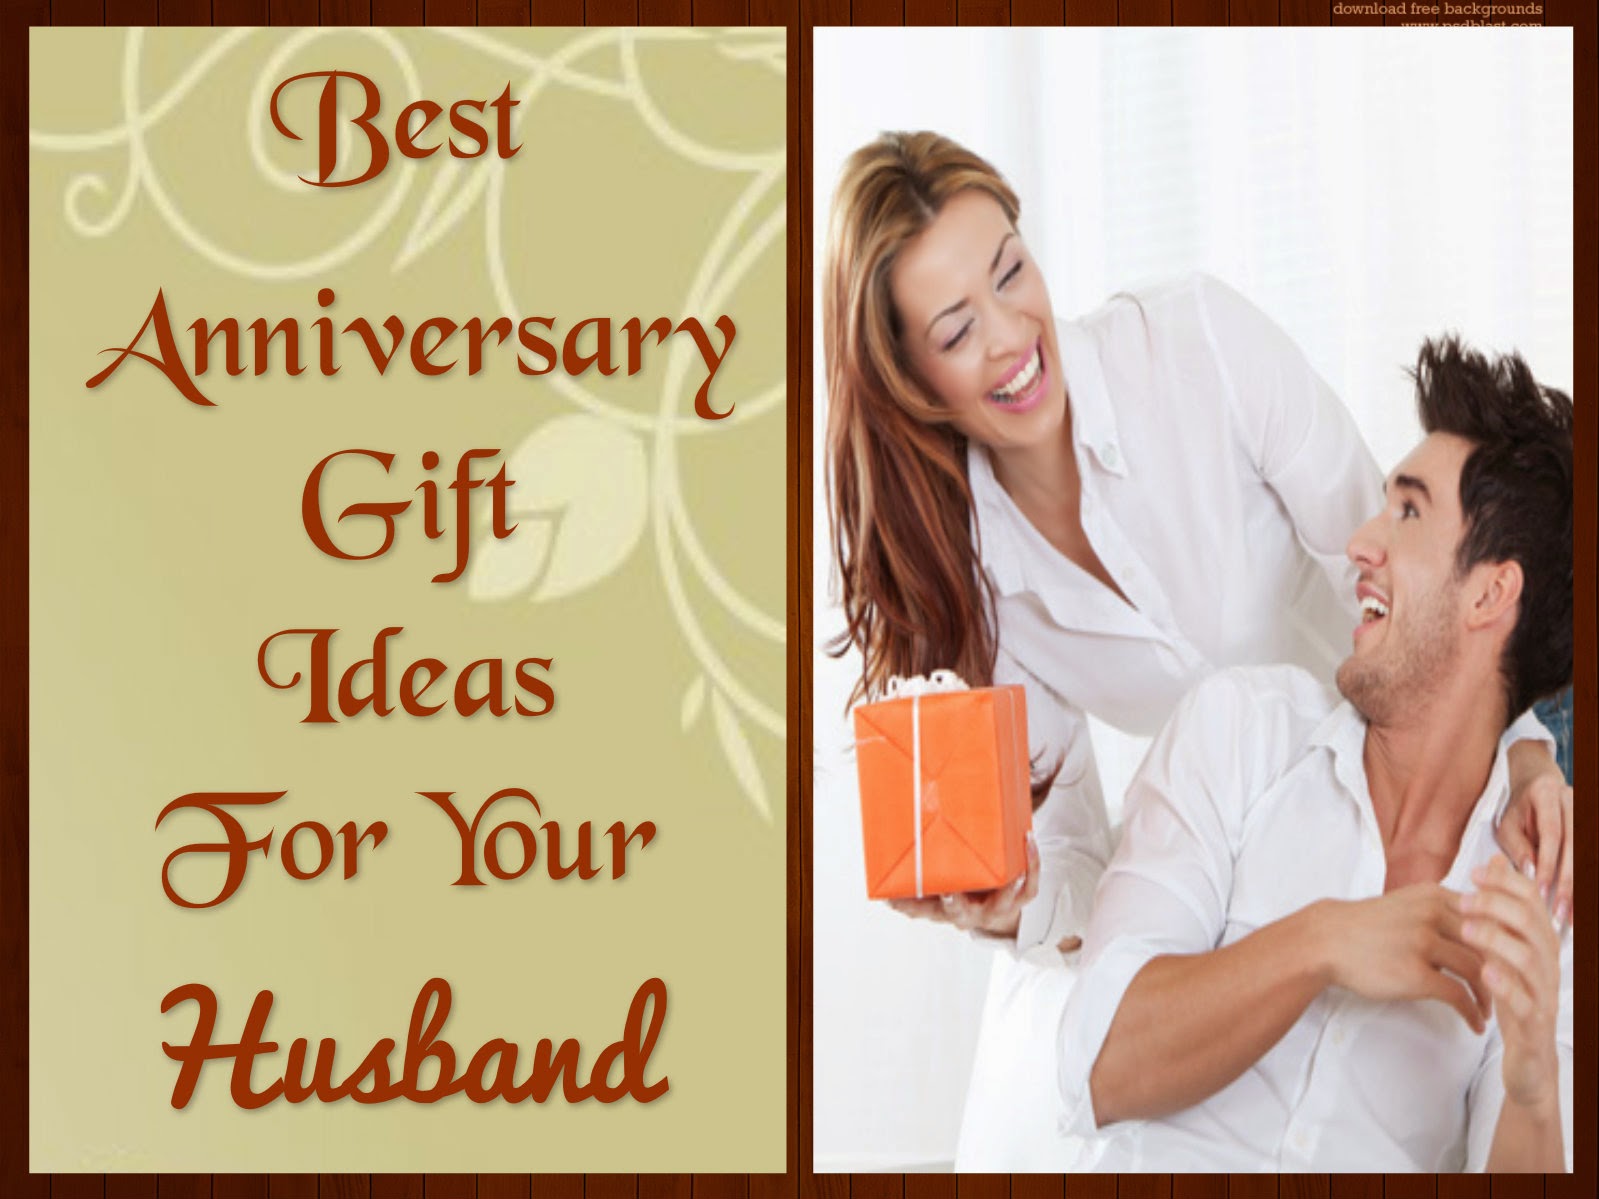  Wedding  Anniversary  Gifts  Best Anniversary  Gift Ideas  For 